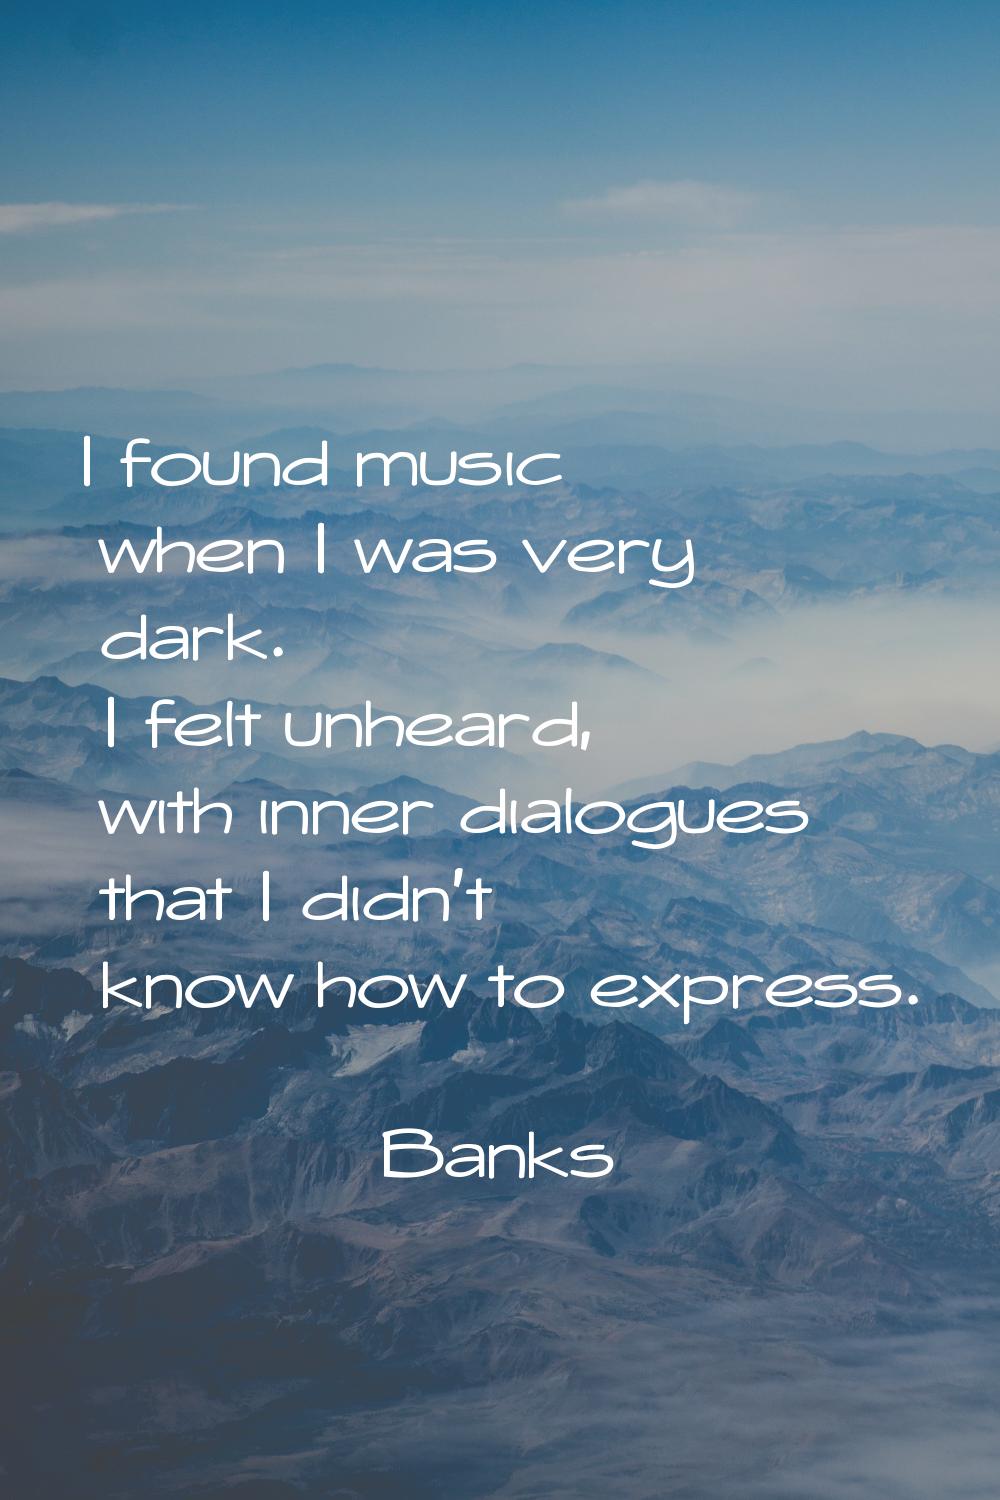 I found music when I was very dark. I felt unheard, with inner dialogues that I didn't know how to 